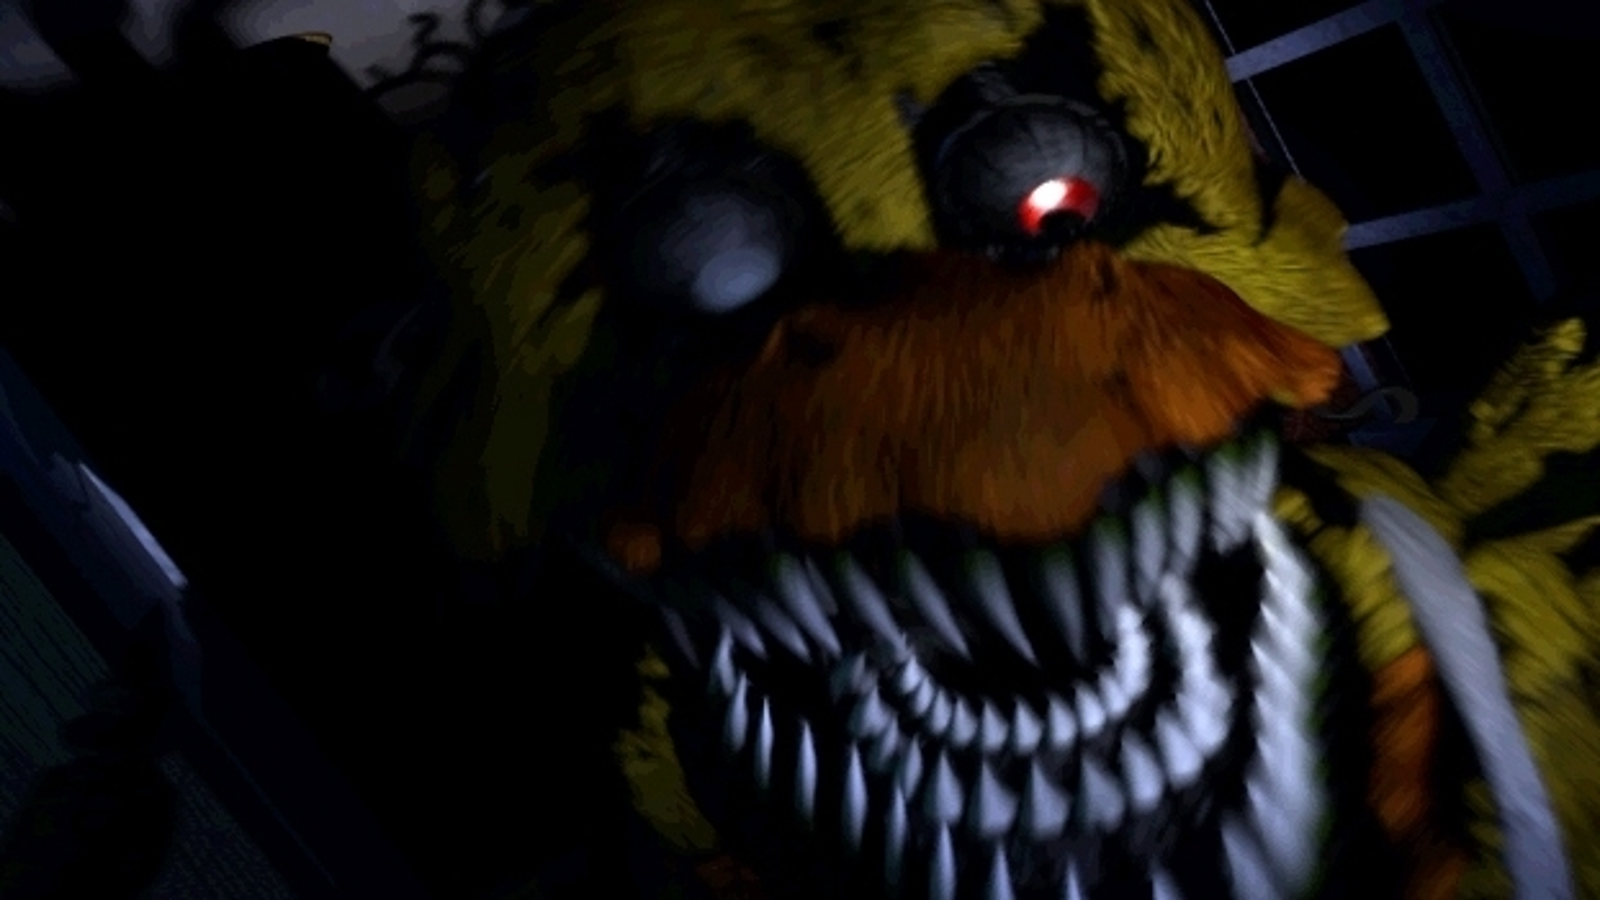 Five Nights At Freddy's 4 Announced, First Image Looks Horrifying